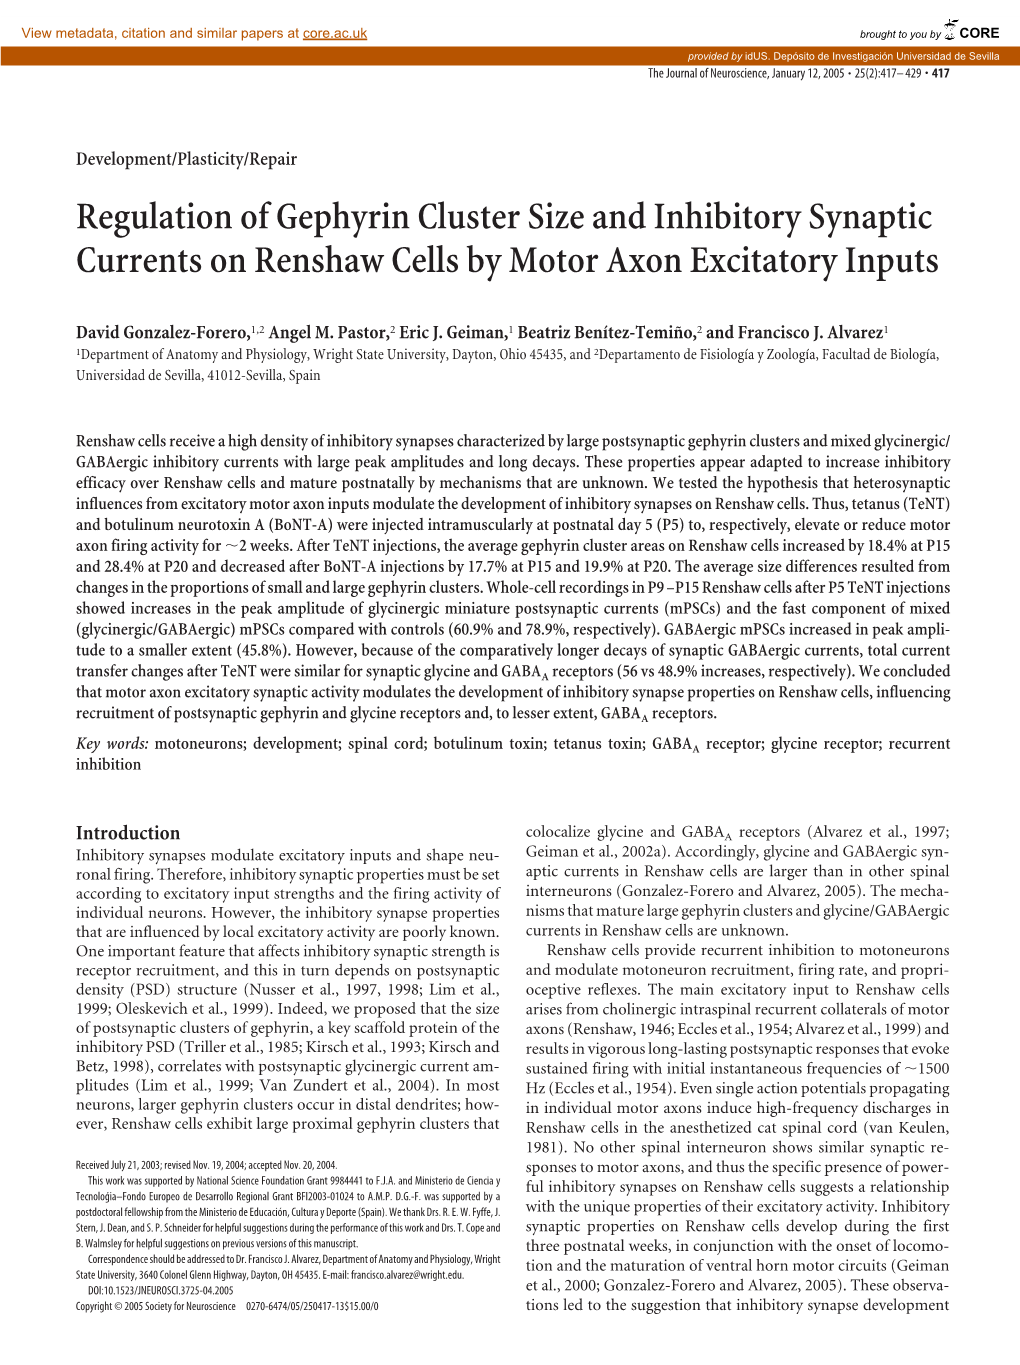 Regulation of Gephyrin Cluster Size and Inhibitory Synaptic Currents on Renshaw Cells by Motor Axon Excitatory Inputs